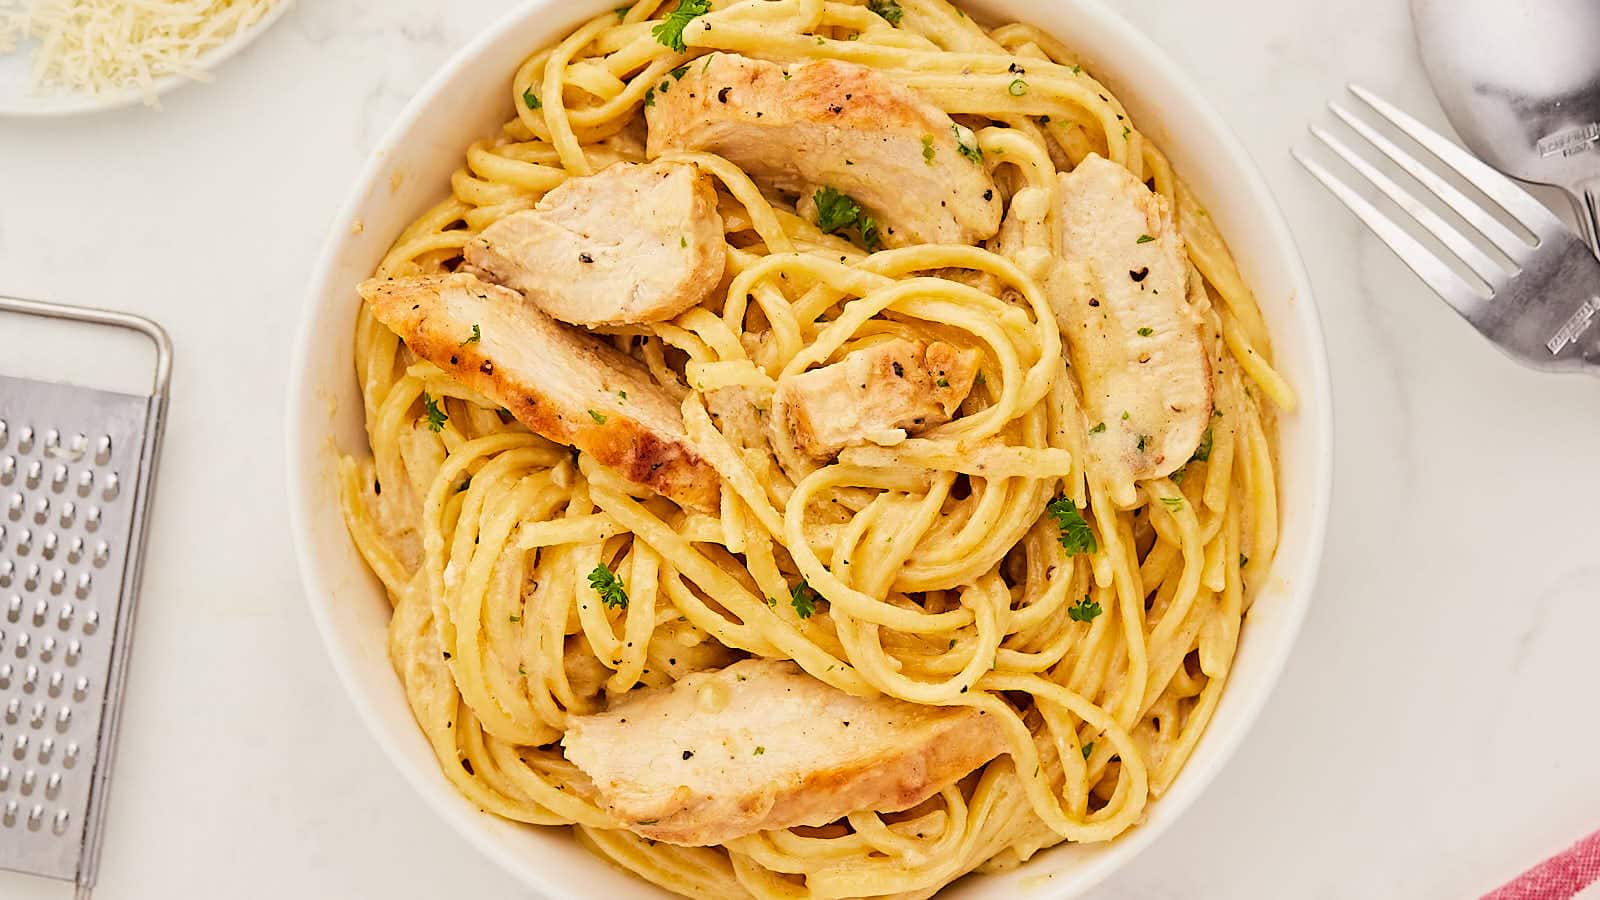 Make your favorite restaurant food at home and find out how easy it is to make classic Chicken Alfredo at home. This homemade, creamy Fettuccine Chicken Alfredo recipe takes just about 30 minutes to make. Easy Chicken Dinner Recipe #cheerfulcook #chickenalfredo #fettuccine #dinner #recipe #easy